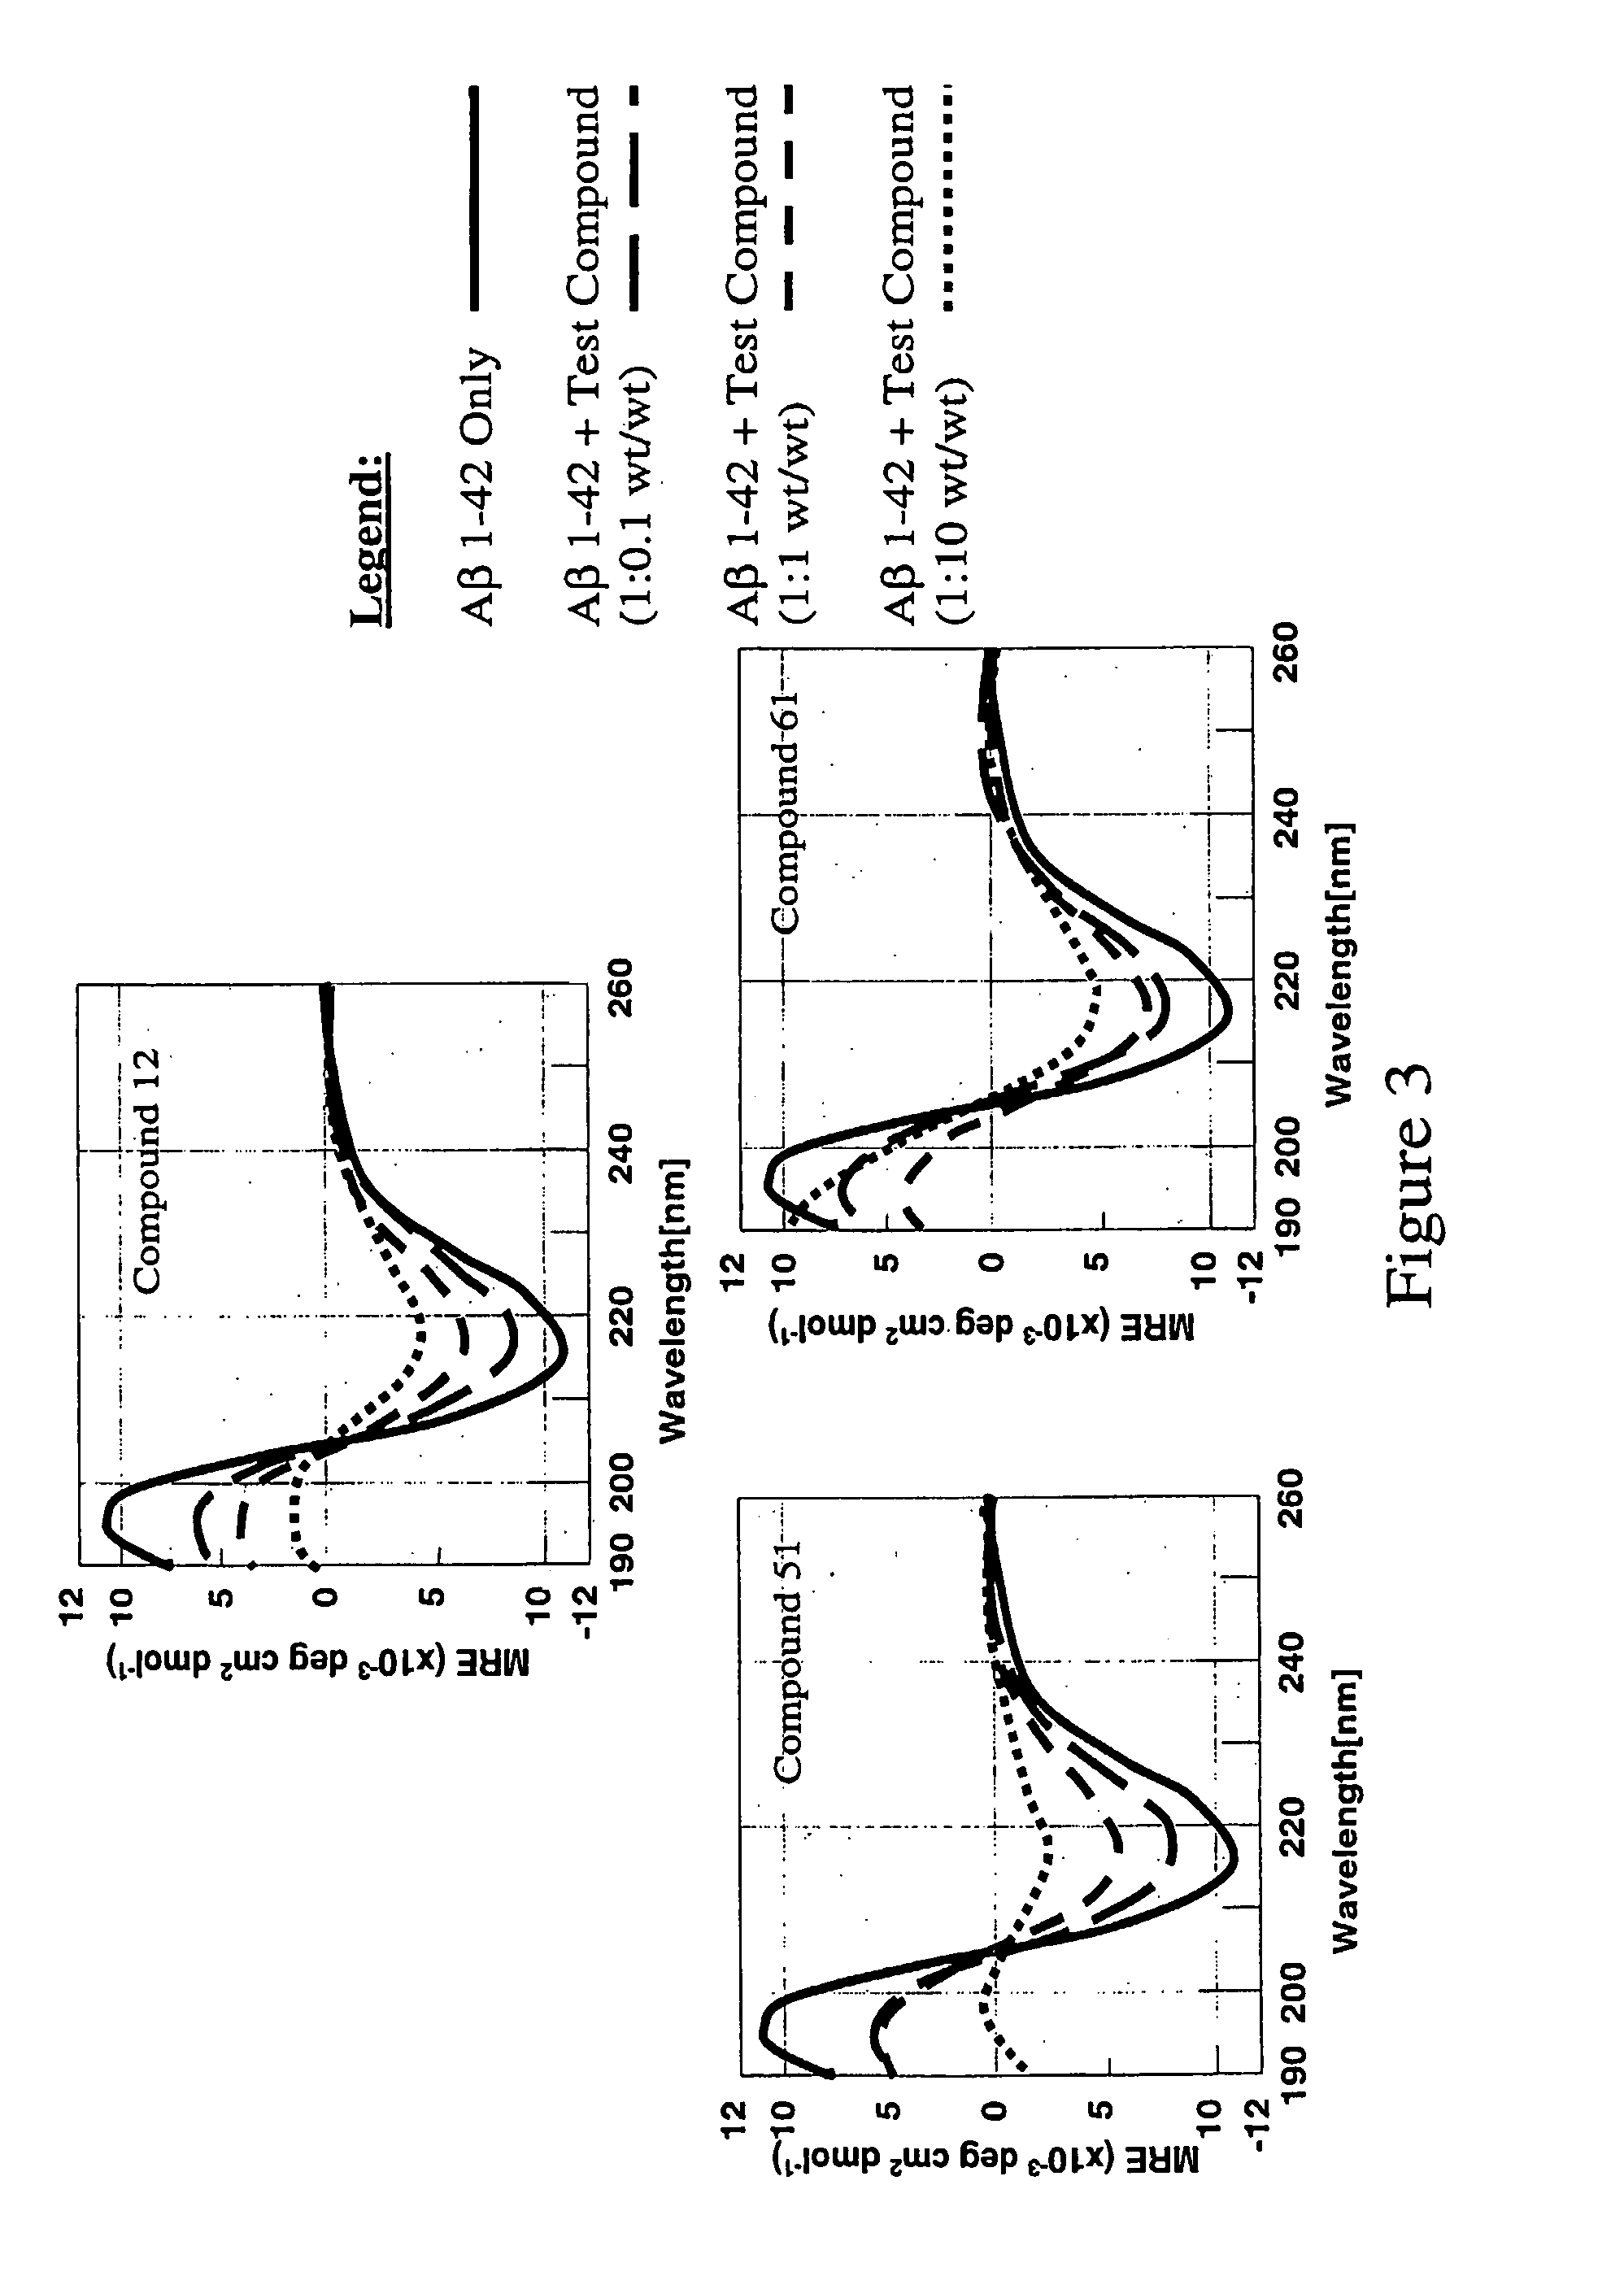 Compounds, compositions and methods for the treatment of amyloid diseases such as systemic AA amyloidosis